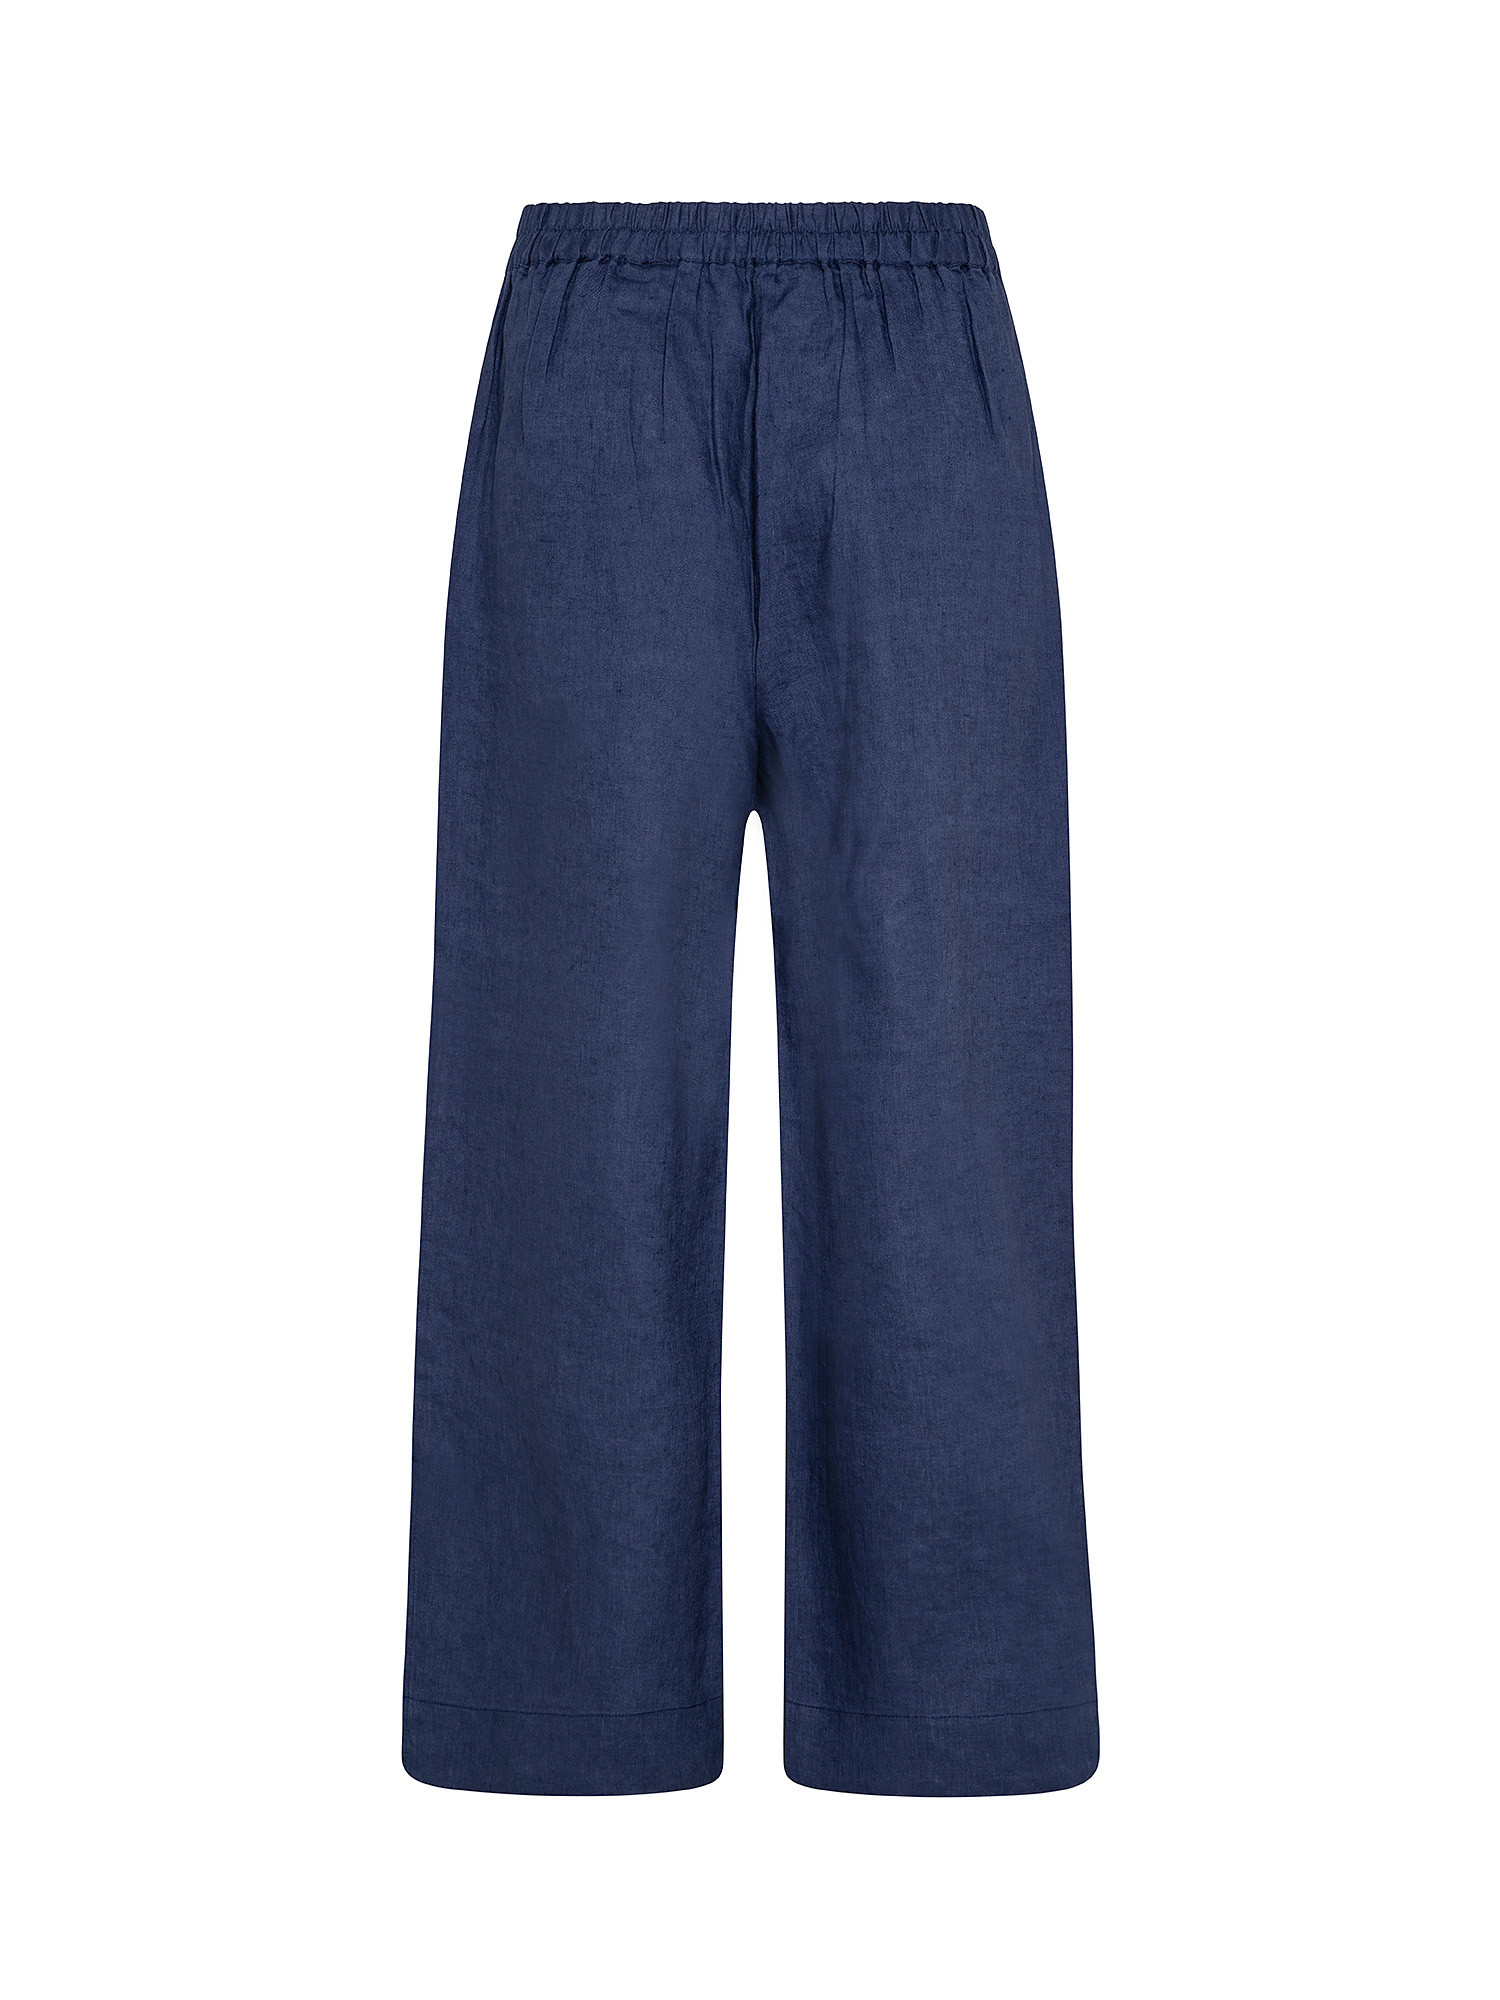 Pure linen trousers with slits, Blue, large image number 1